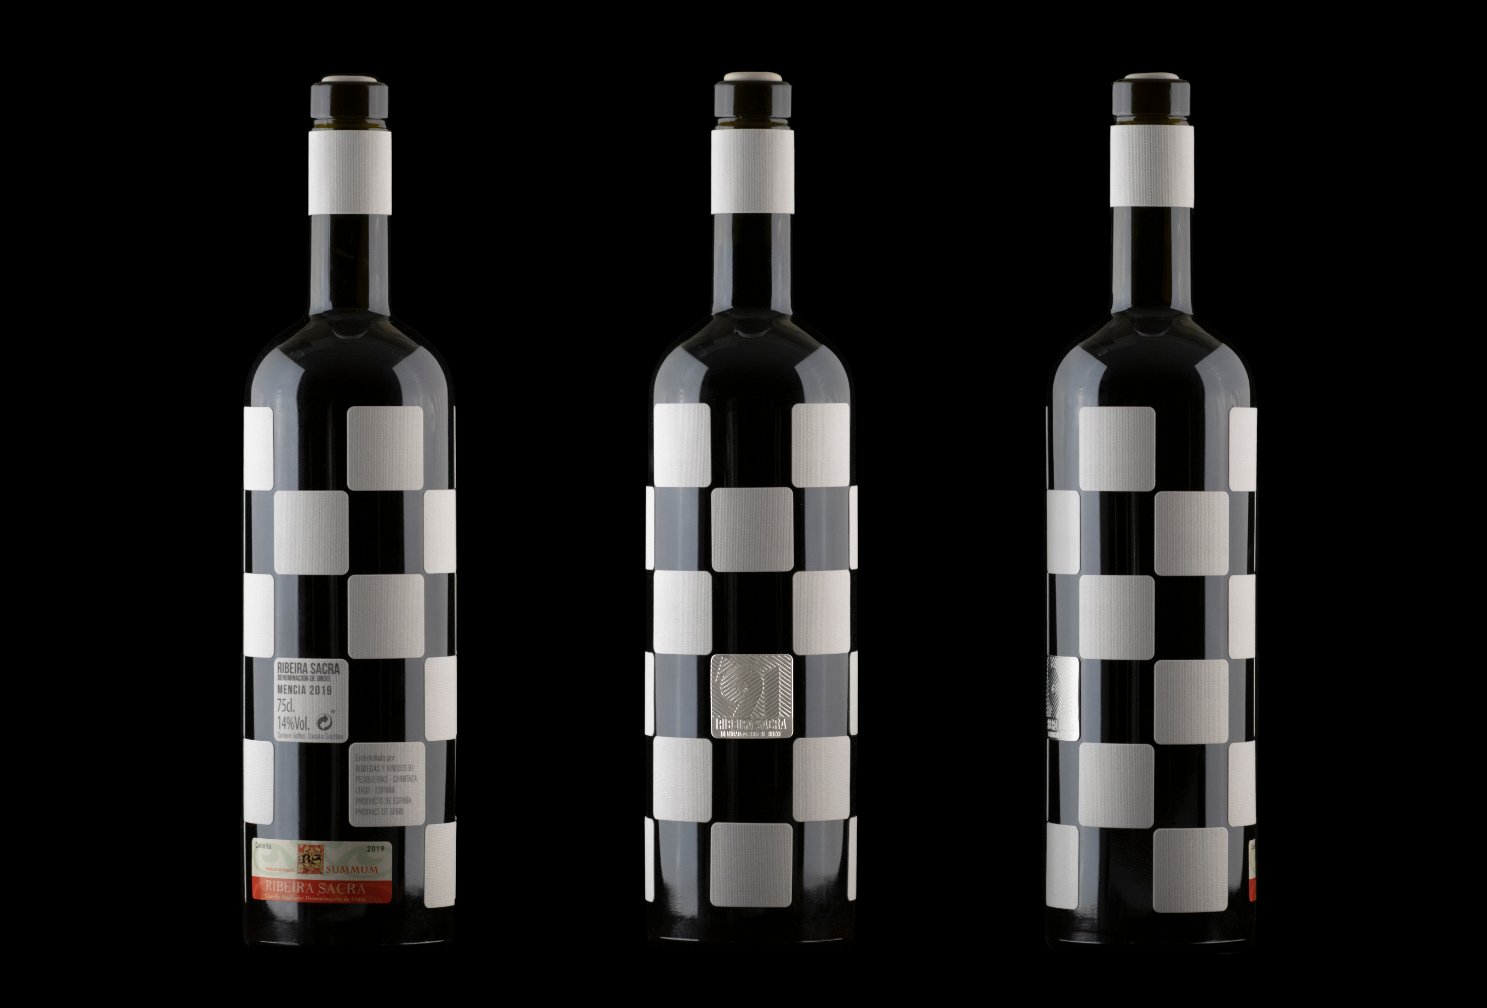 ’91 Checkmate Wine Label Meets the Bottle Just as the River Meets the Vineyard